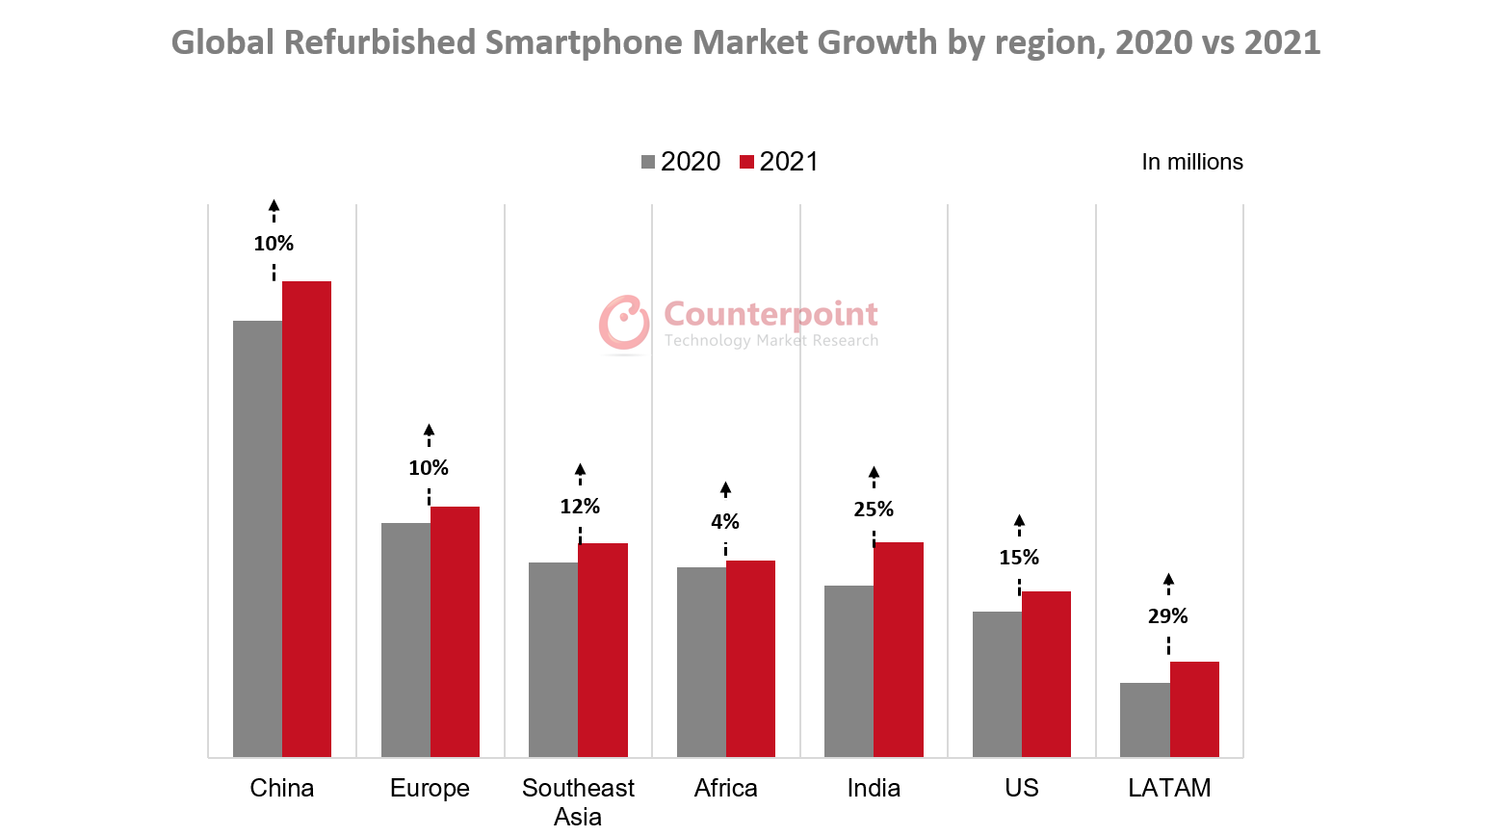 The market for refurbished phones is growing, but less quickly in Europe